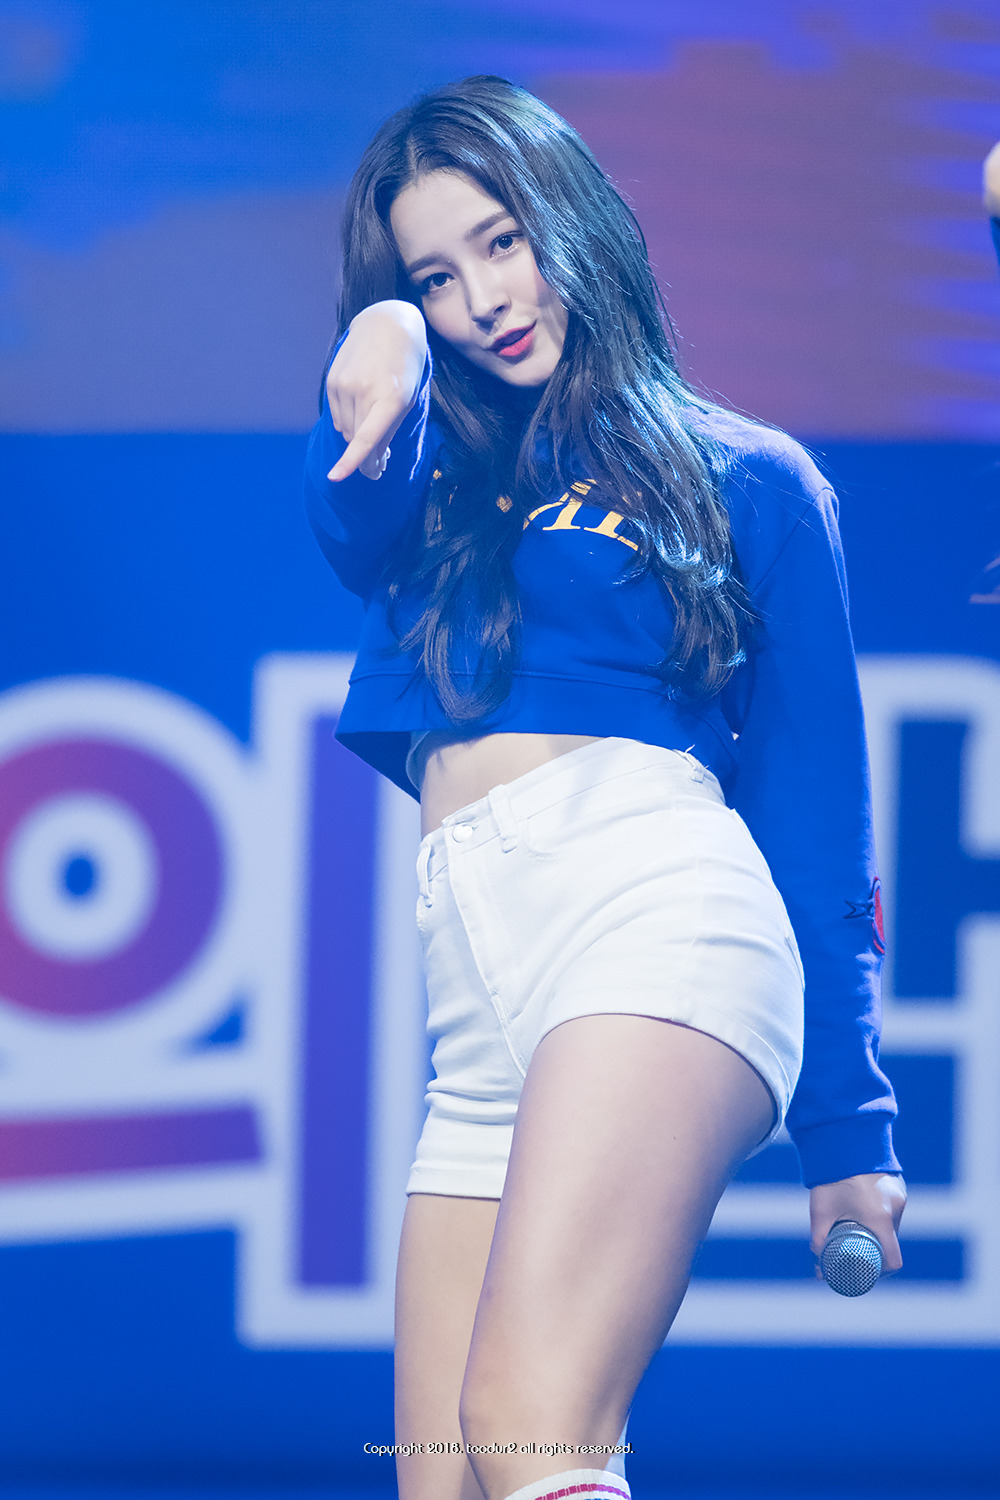 The Most Sexiest Outfit Of Nancy Momoland 900girls